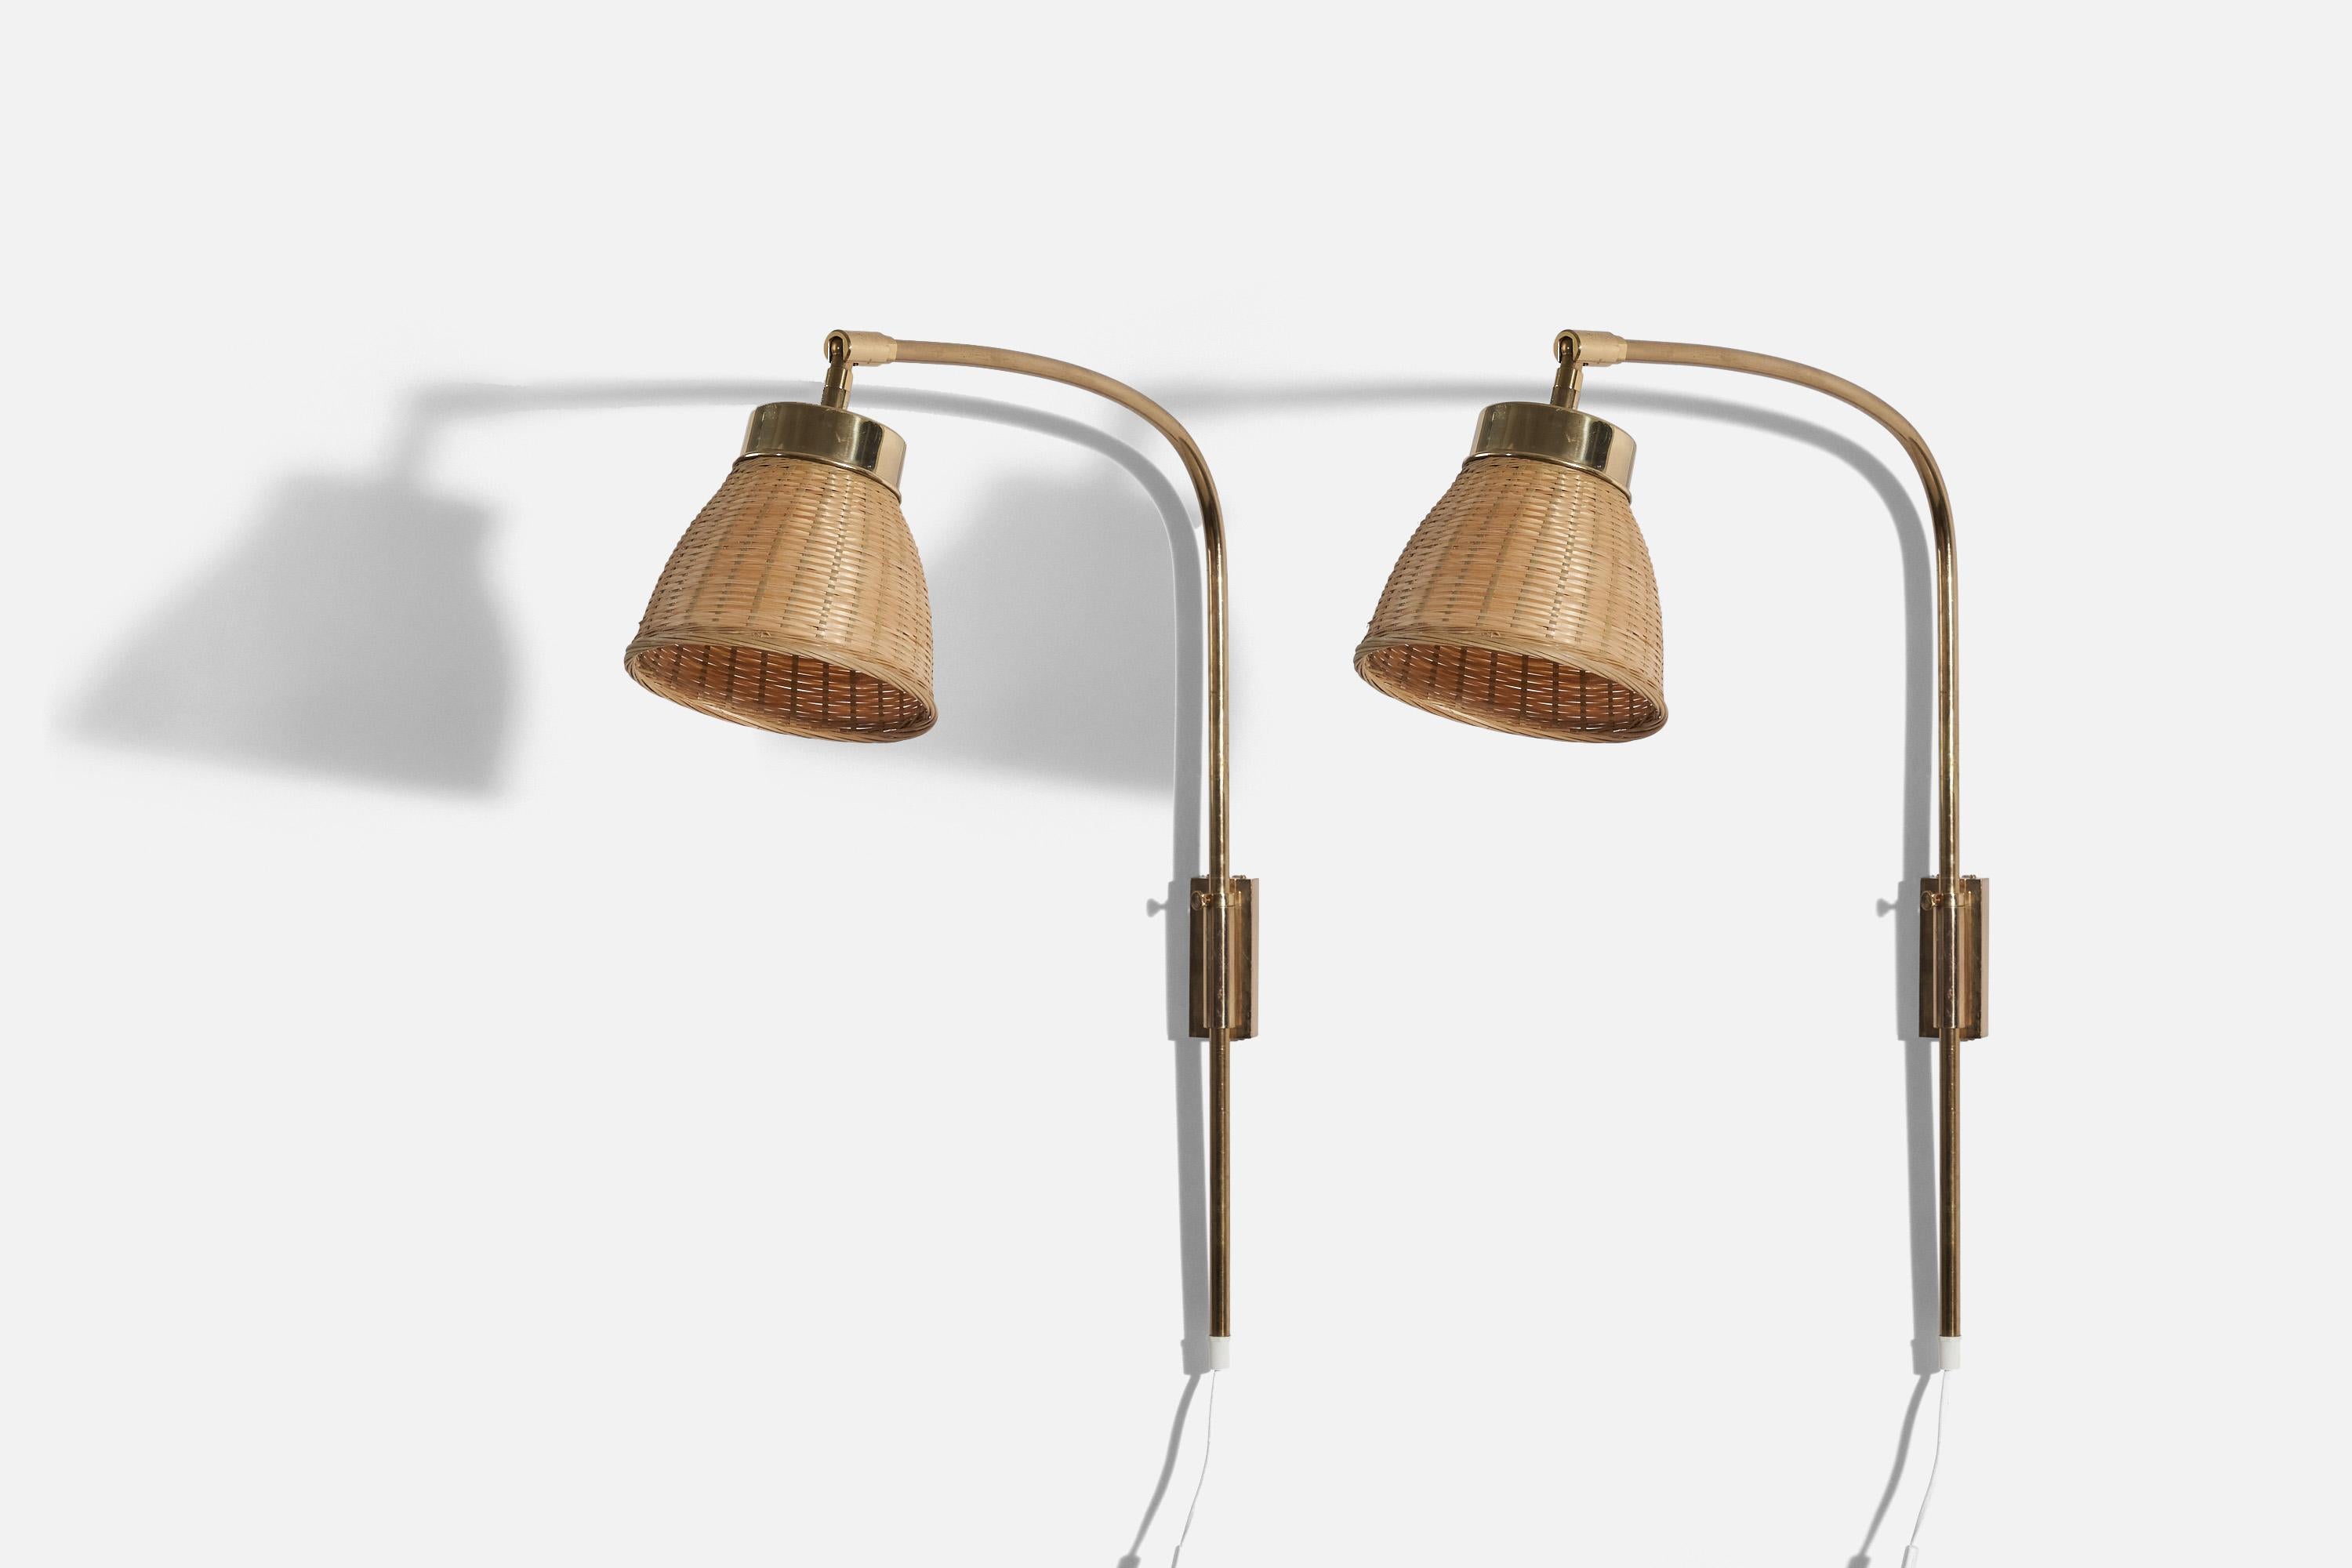 A pair of adjustable, brass and rattan wall lights, designed by Josef Frank and produced by Svenskt Tenn, Stockholm, Sweden, c. 1950s. 

Variable dimensions, measured as illustrated in the first image. 

Dimensions of the back plate (inches) : 4